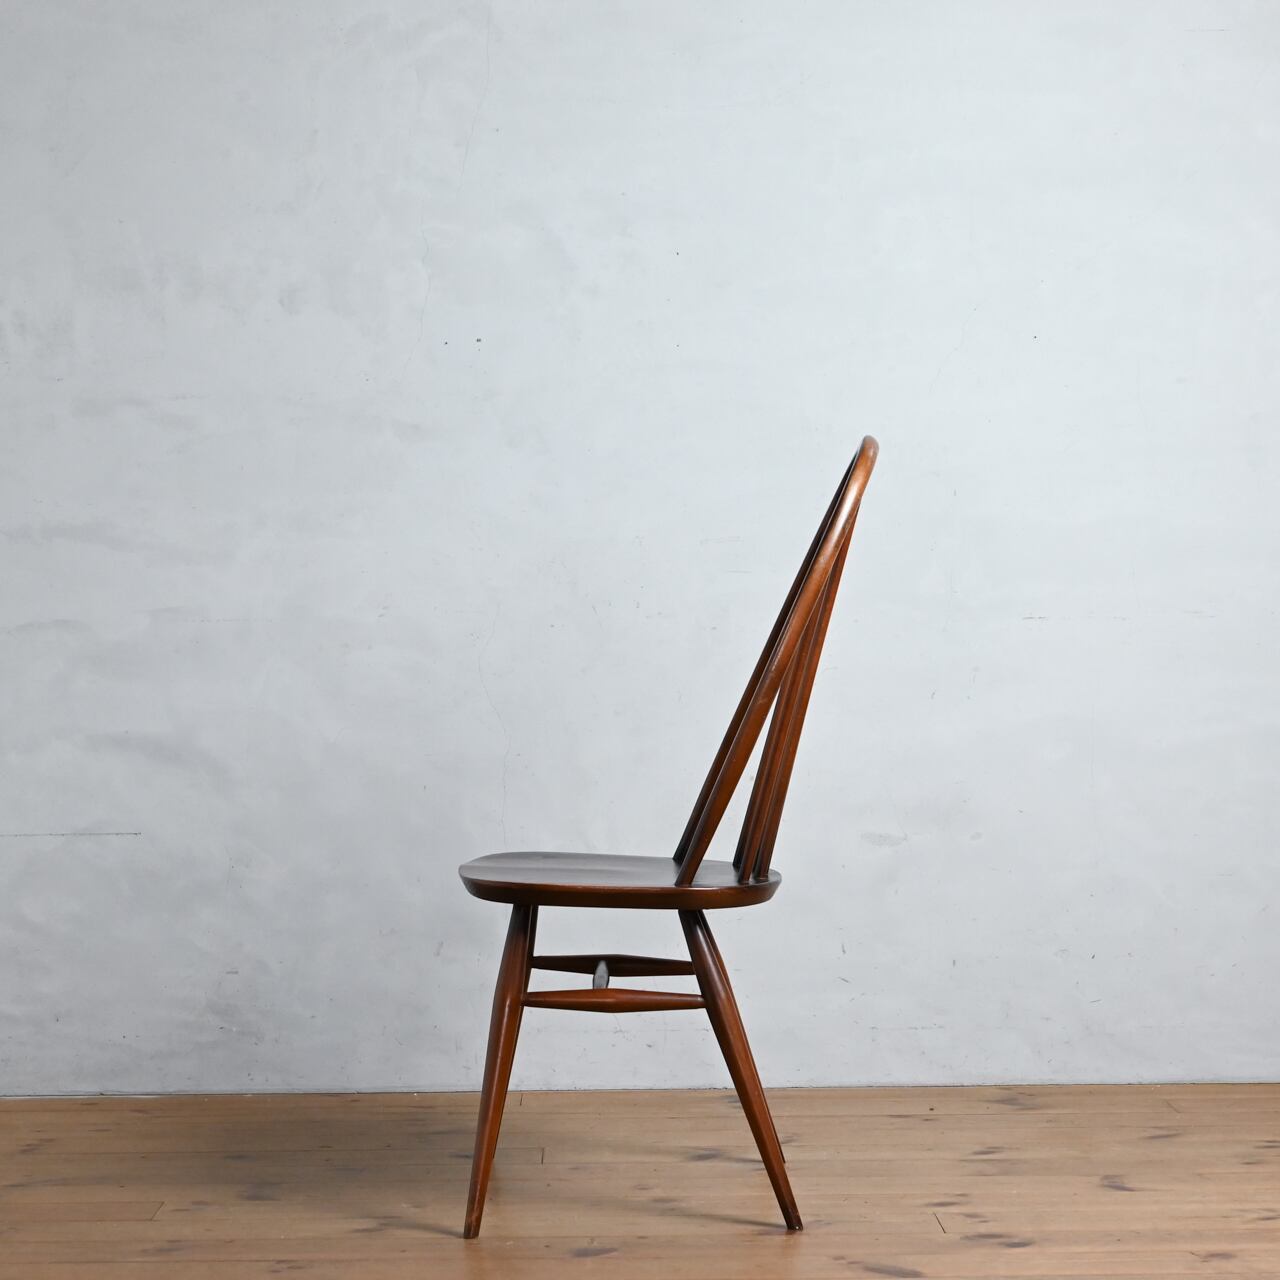 Ercol Quaker Chair / アーコール クエーカー チェア 〈ダイニング 